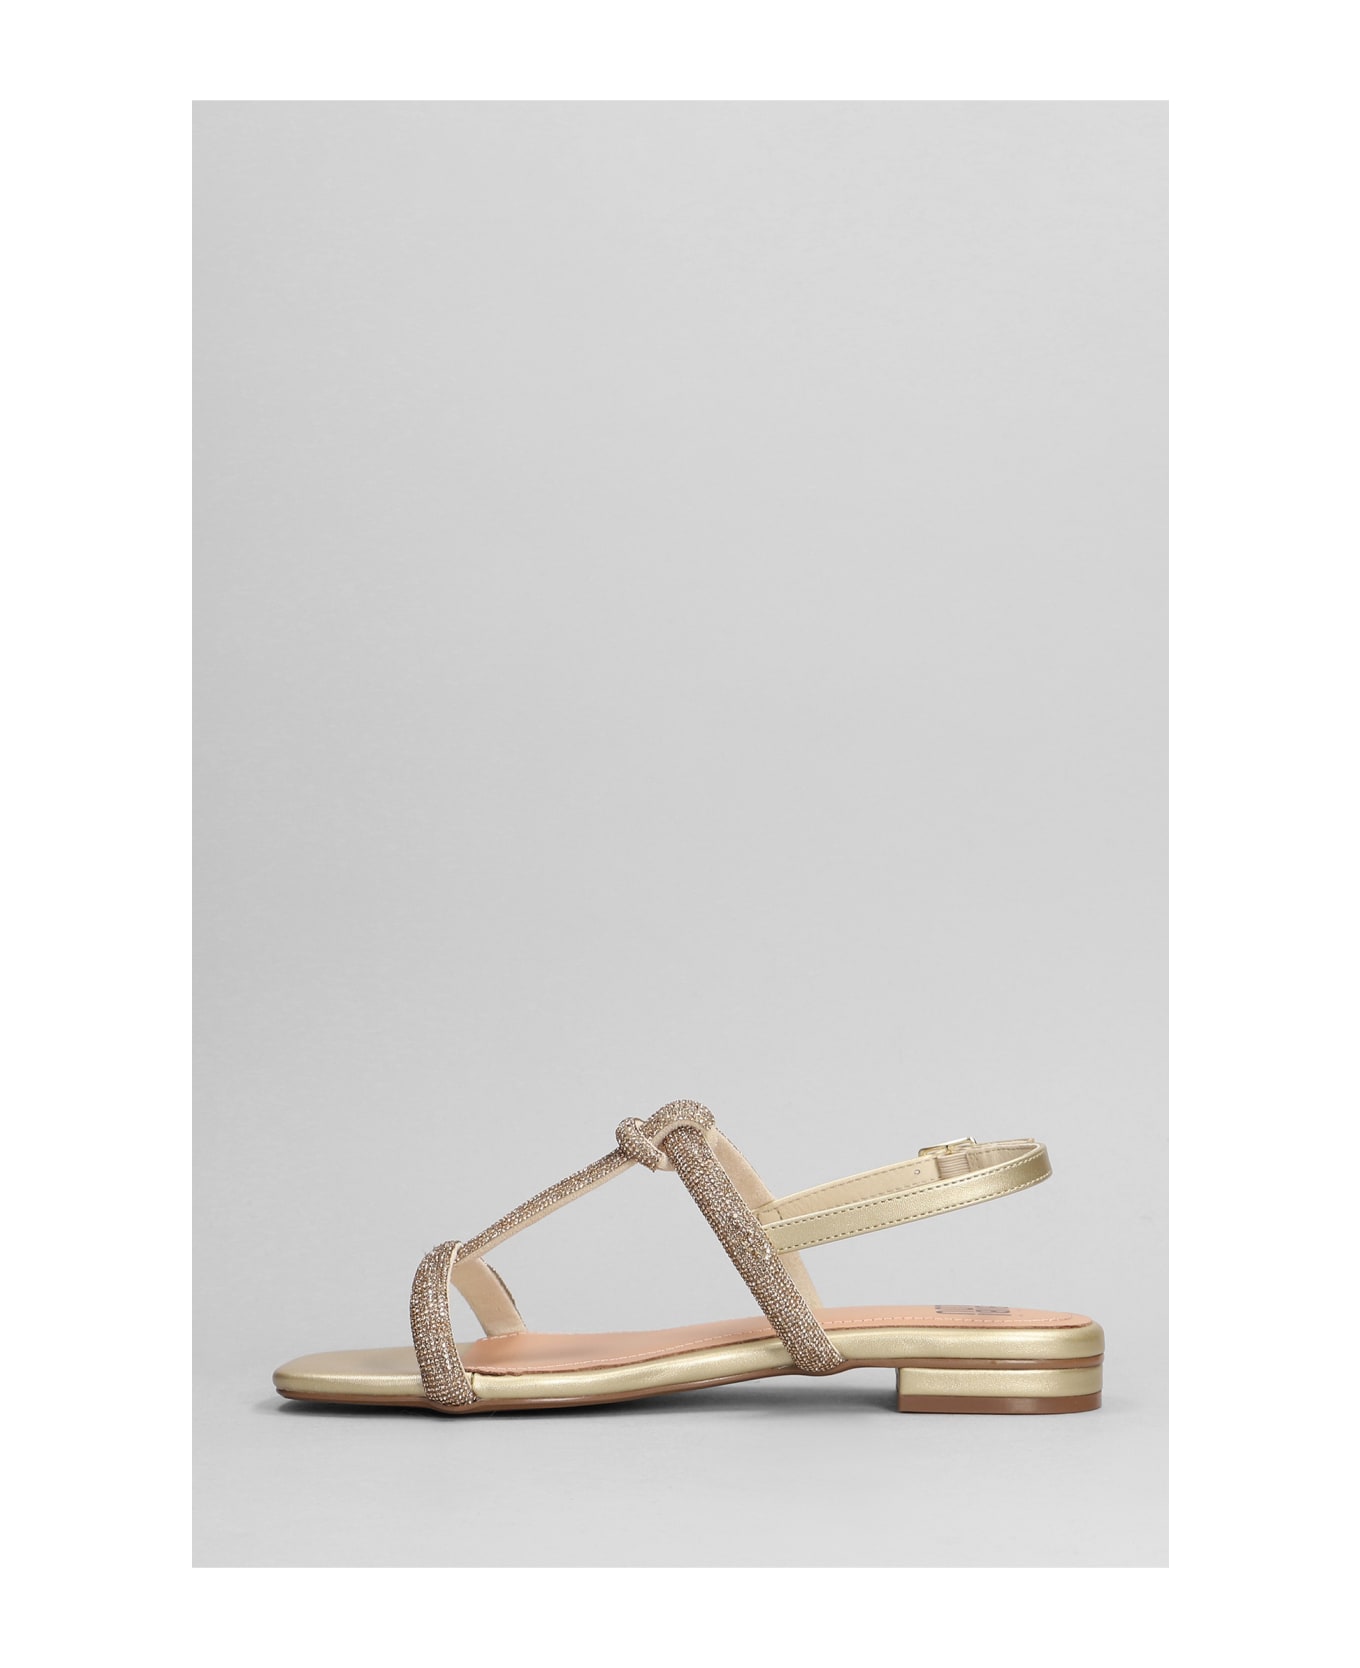 Bibi Lou Caloy Flats In Gold Leather - gold